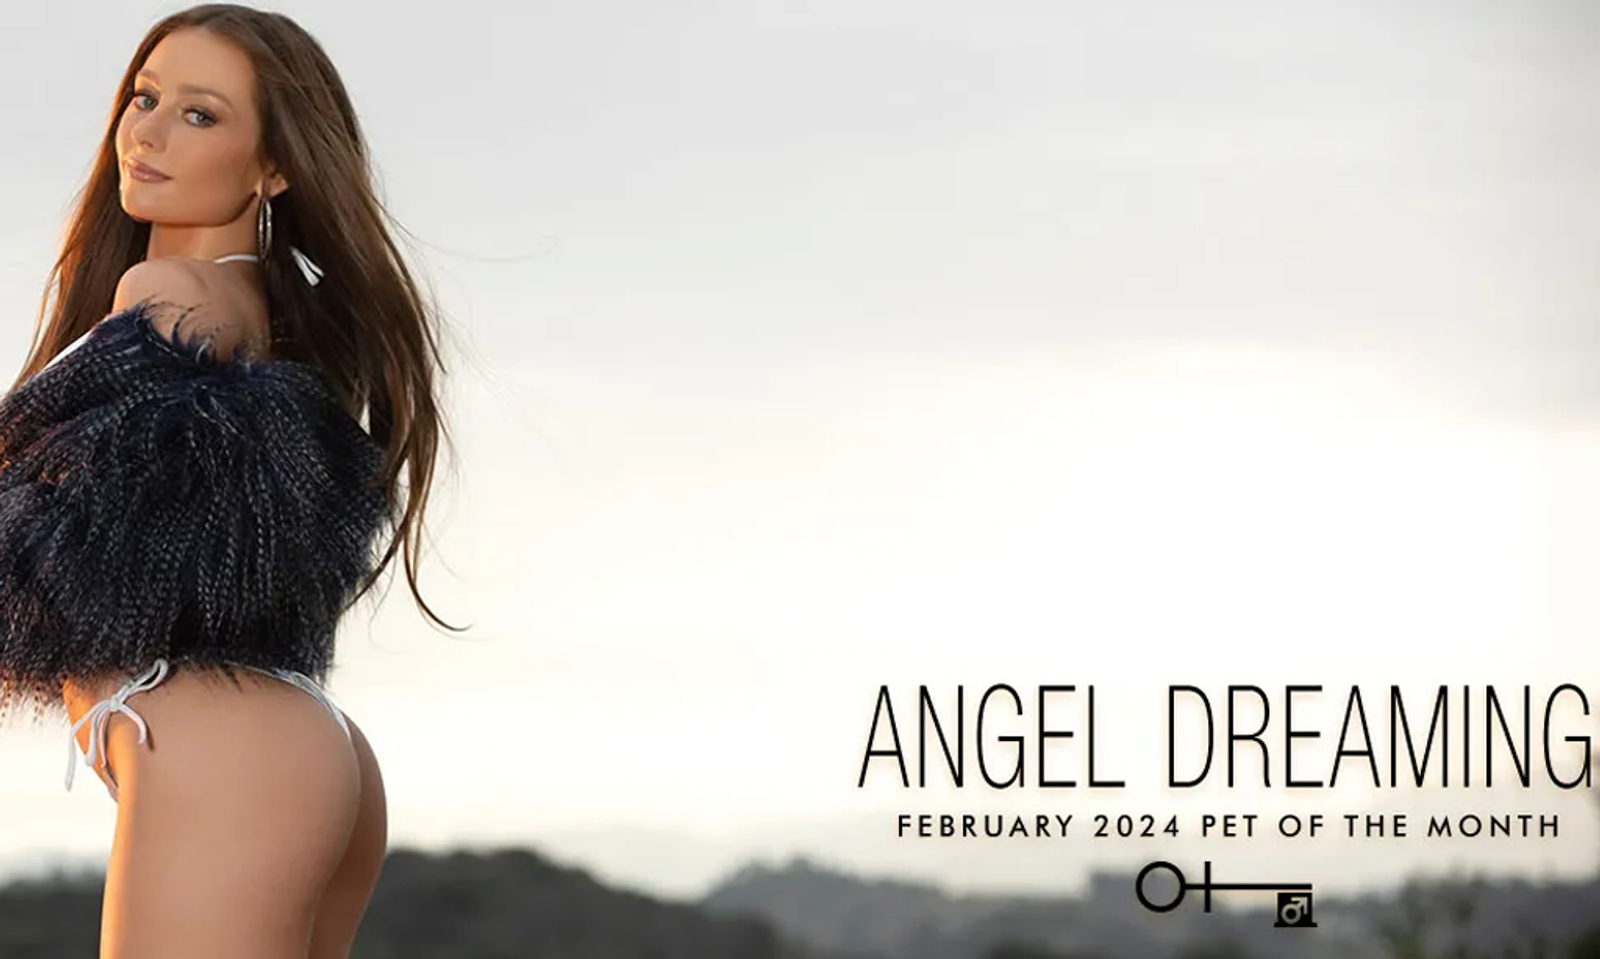 Penthouse Announces Angel Dreaming as February Pet of the Month